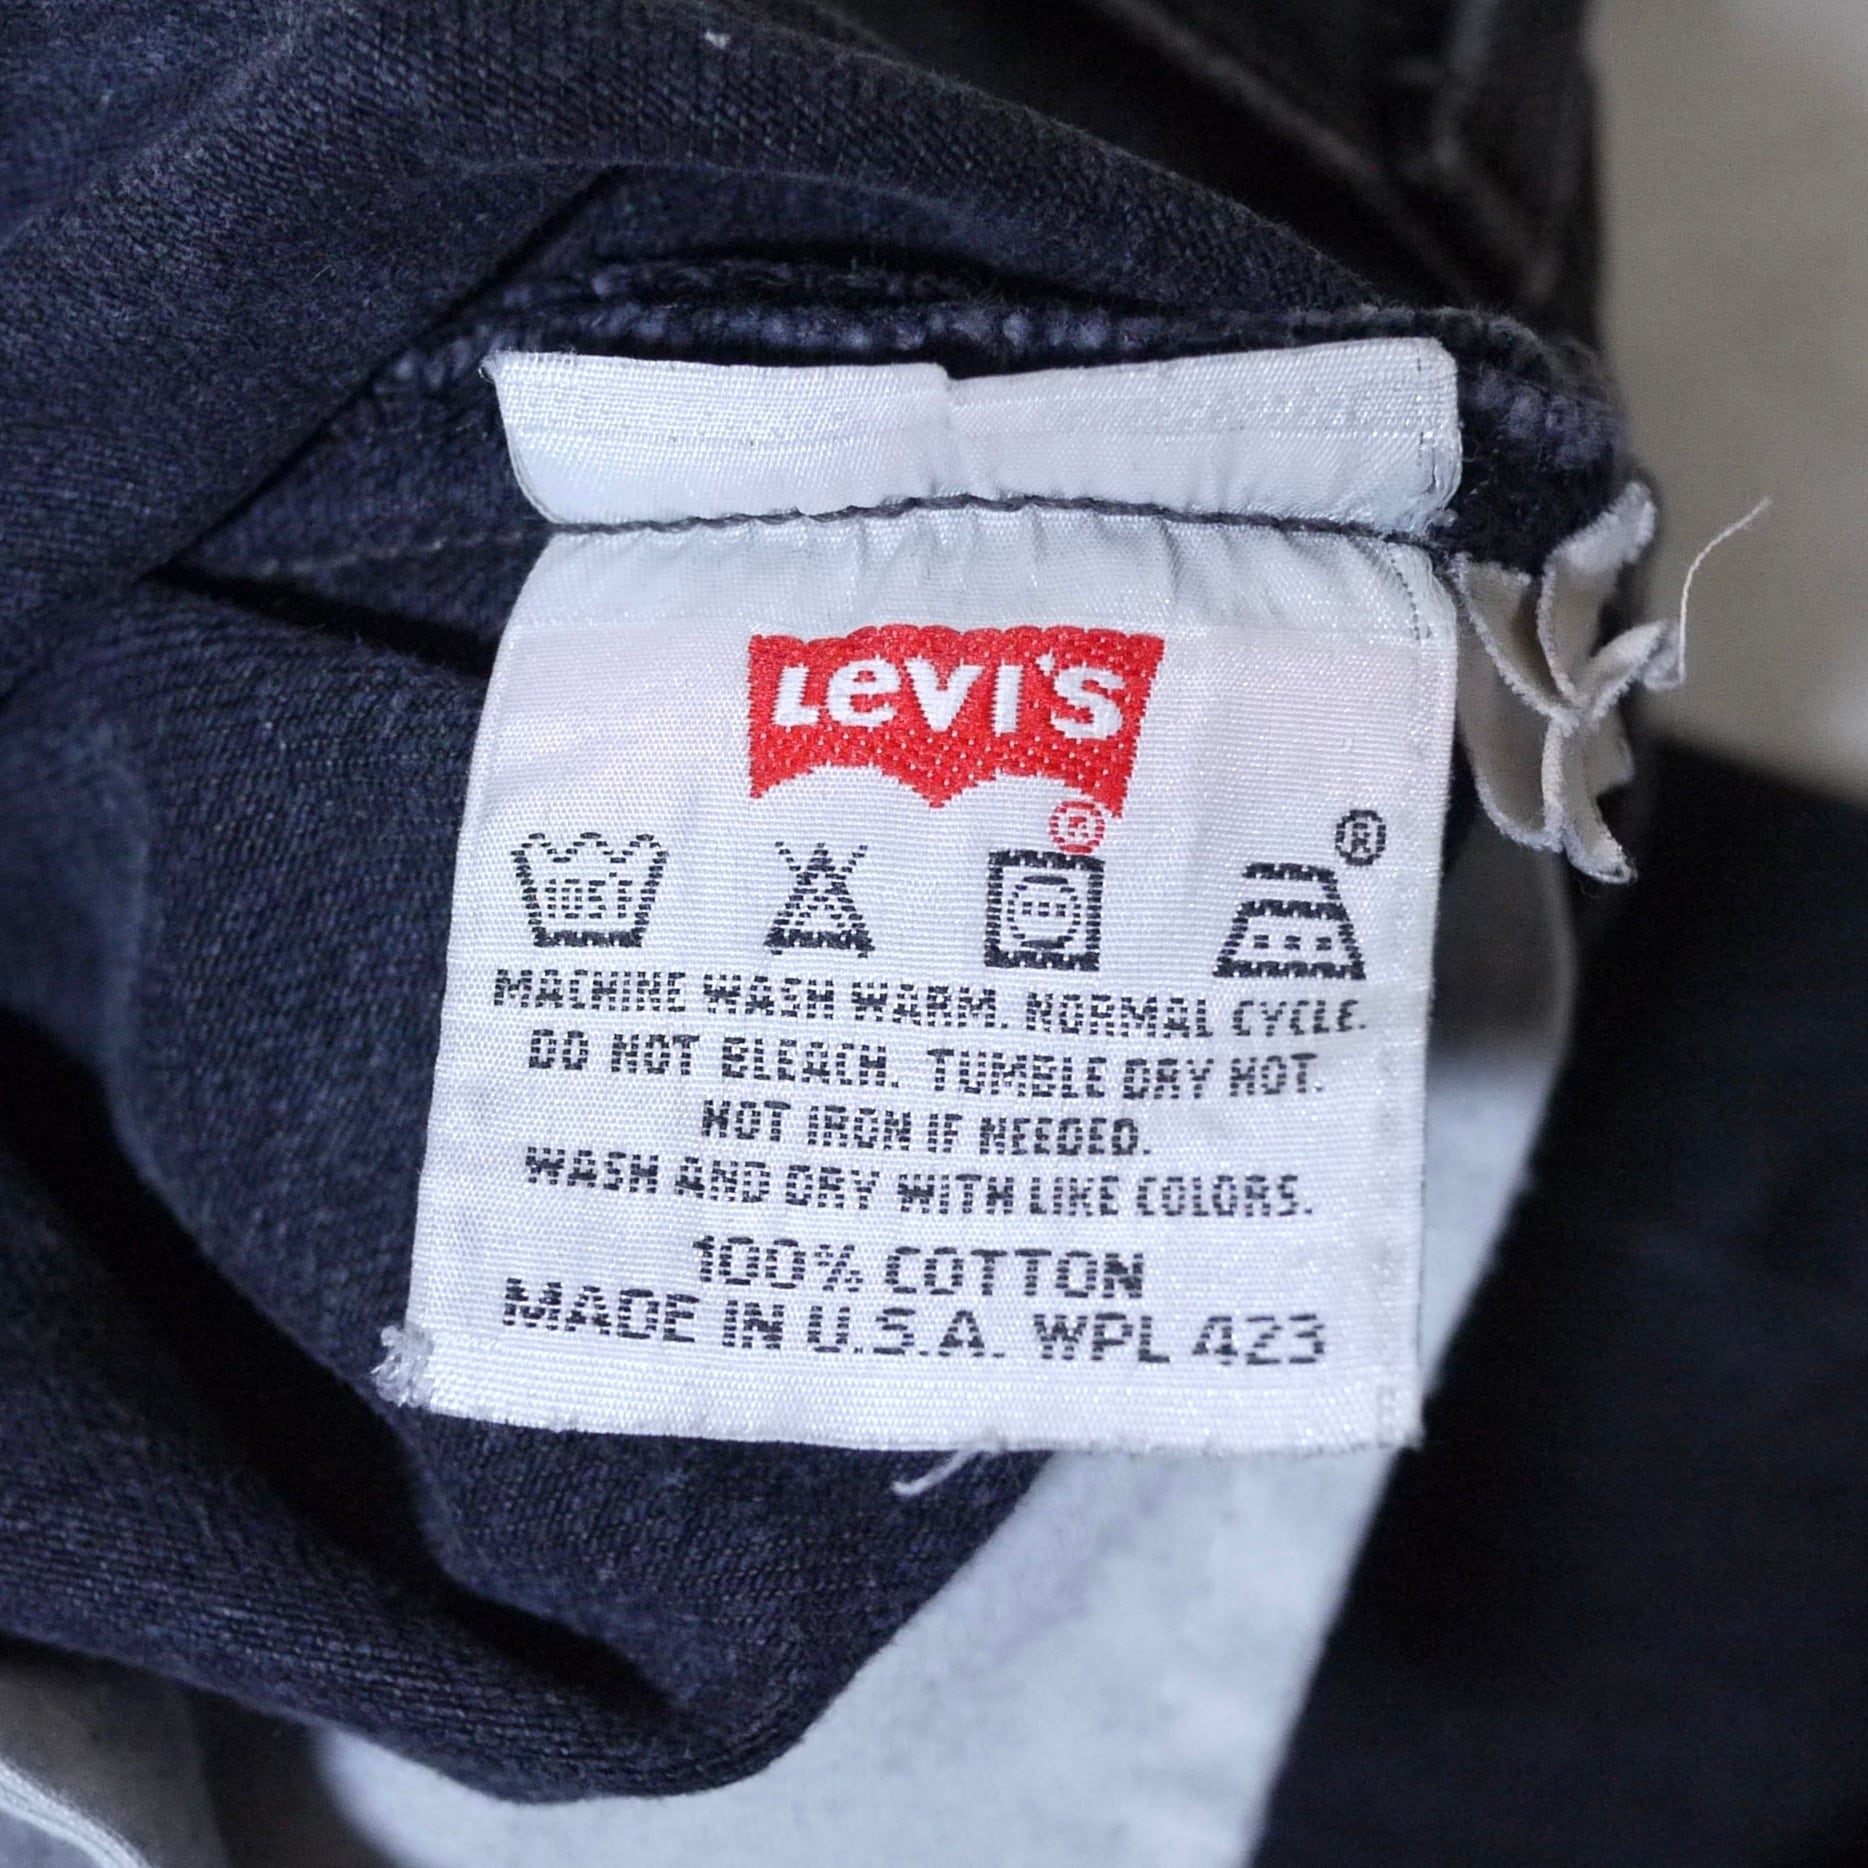 Levi's® Flagship Opens in Osaka, Japan - Levi Strauss & Co : Levi Strauss &  Co